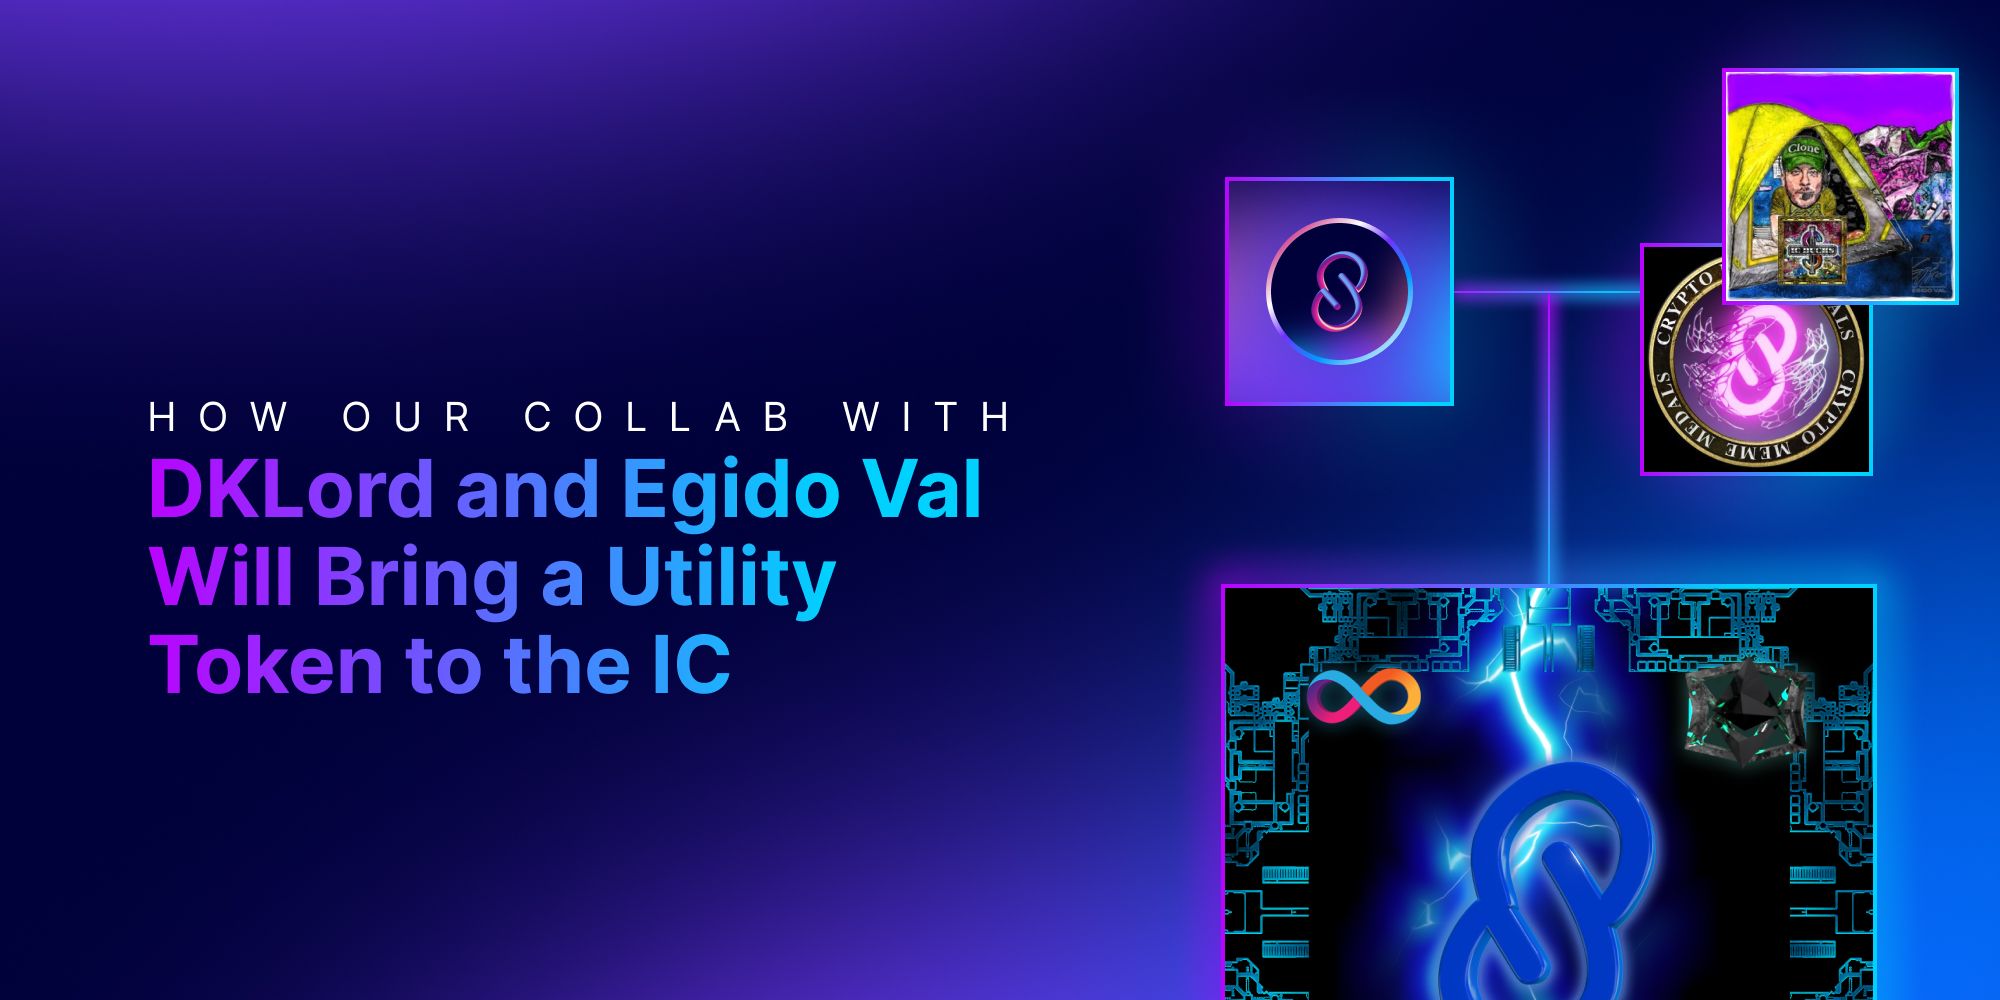 How Our Collab with DKLord and Egido Val Will Bring a Utility Token to the IC